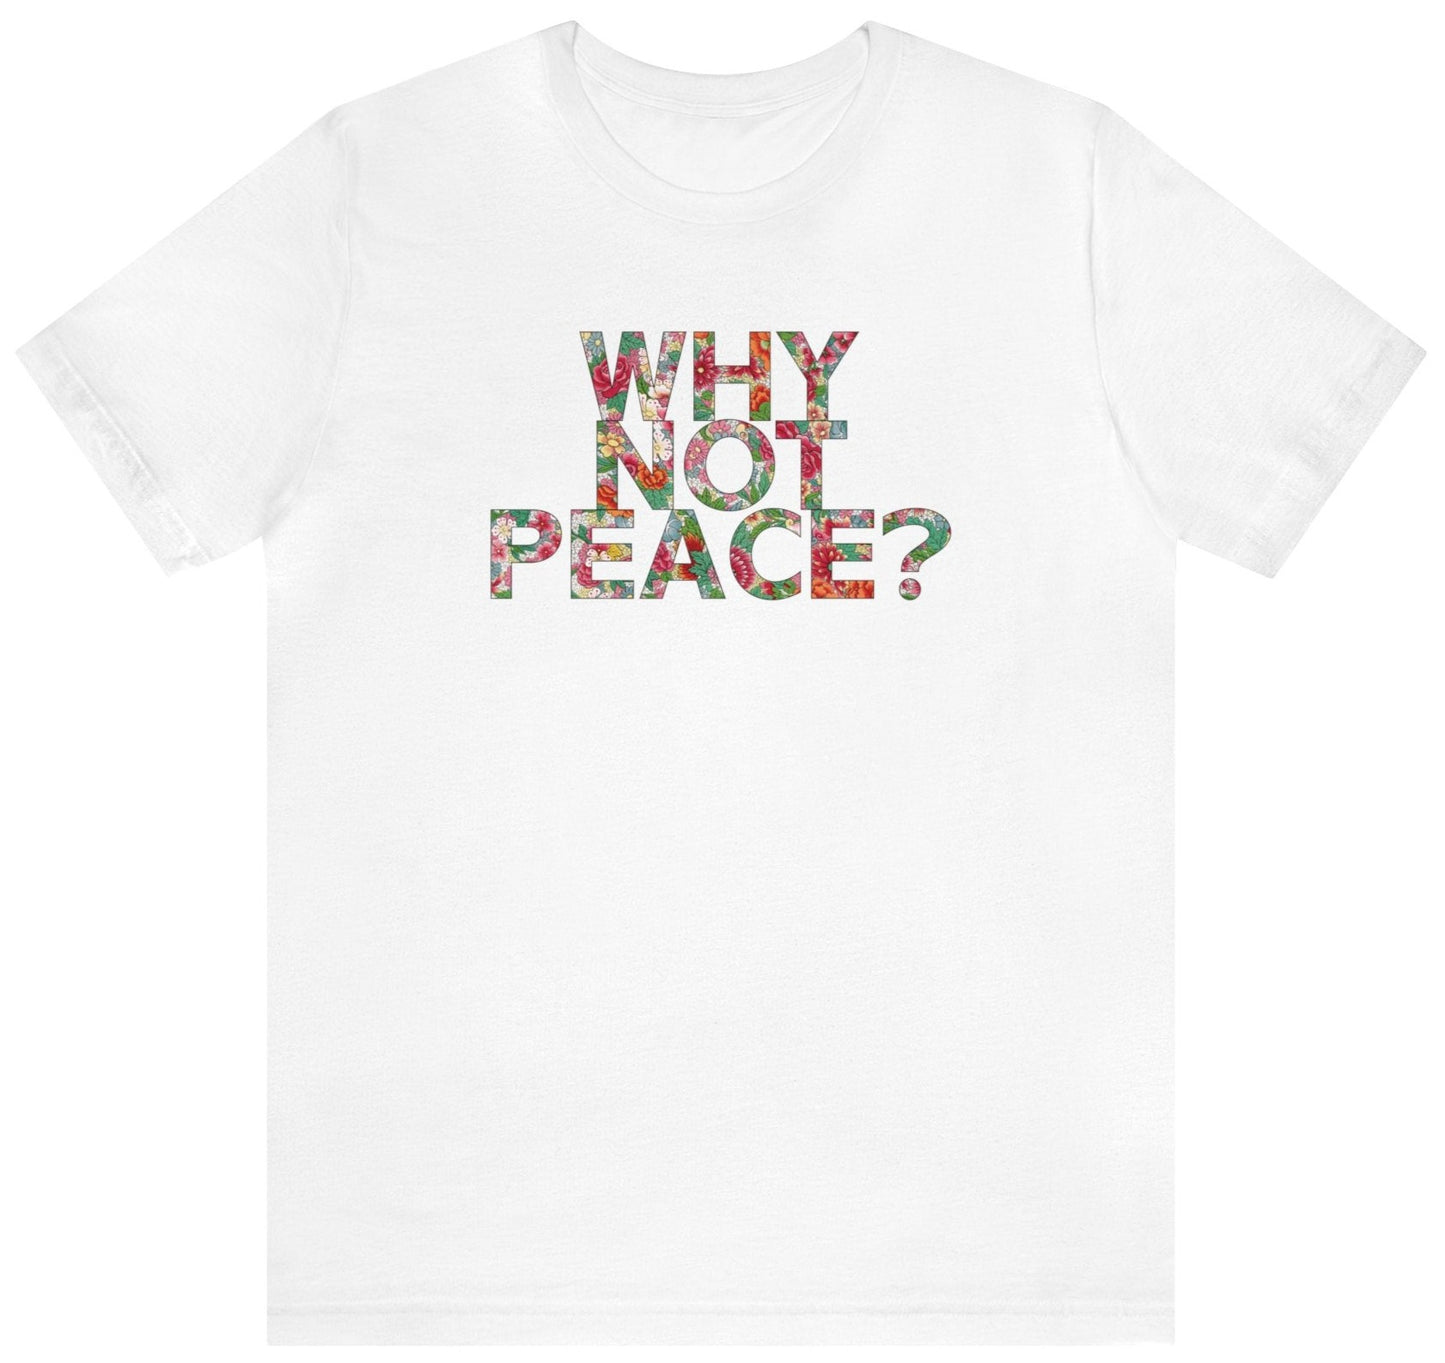 Why not peace t shirt